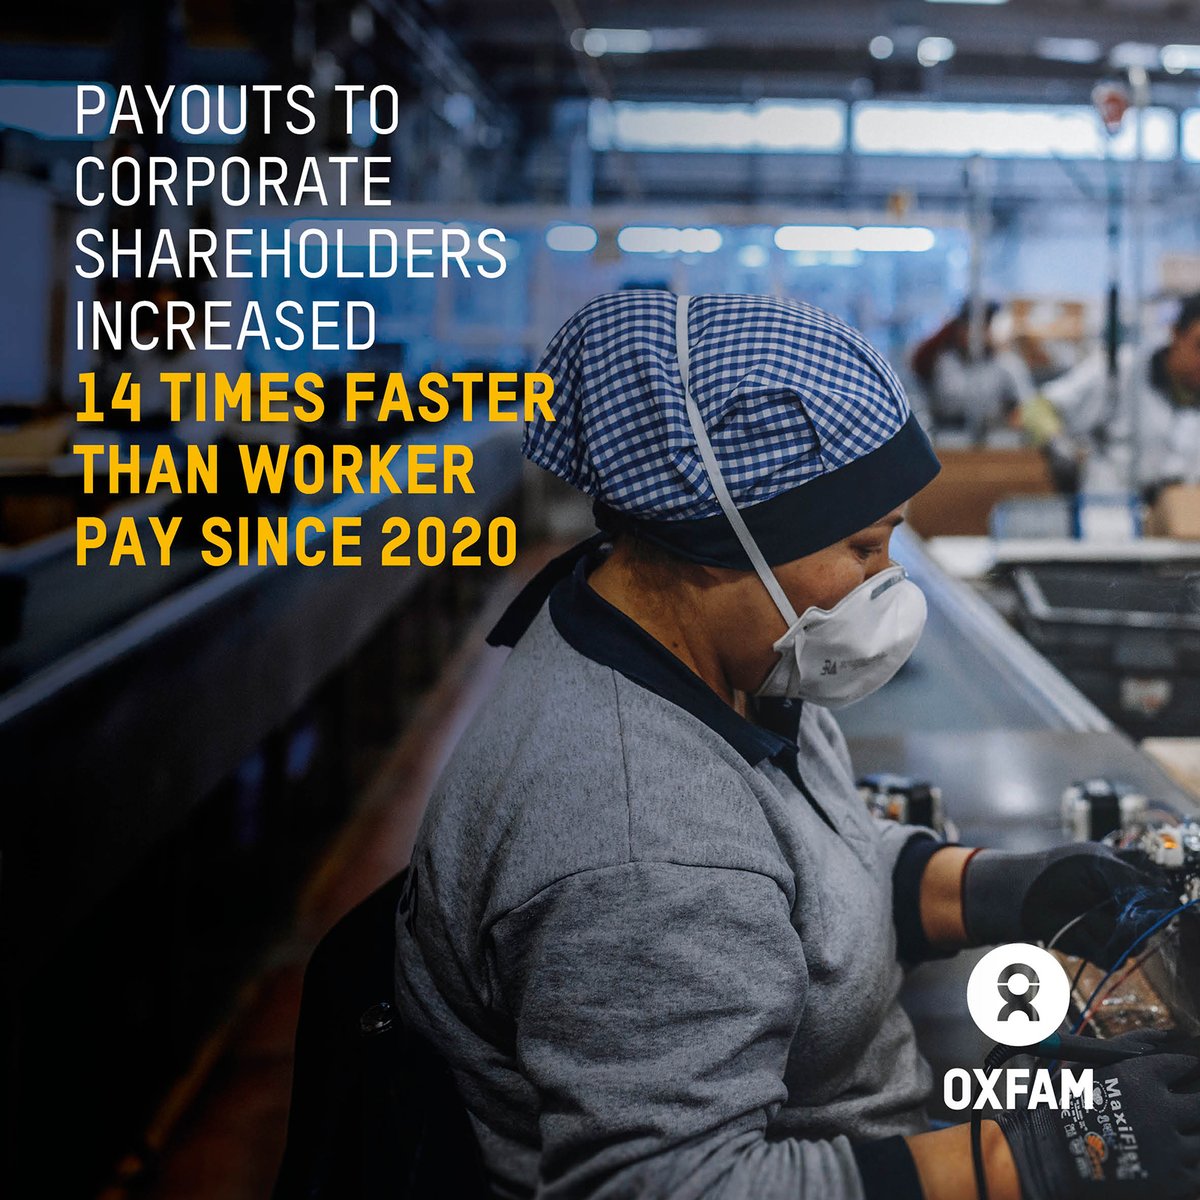 The richest 1% pocketed on average $9,000 in dividends in 2023. This is equivalent to 8 months of hard work and wages for the average worker, globally. We must #FightInequality by rewarding work, not wealth. #WorkersDay #InternationalWorkersDay #Oxfam oxf.am/WorkersDay24